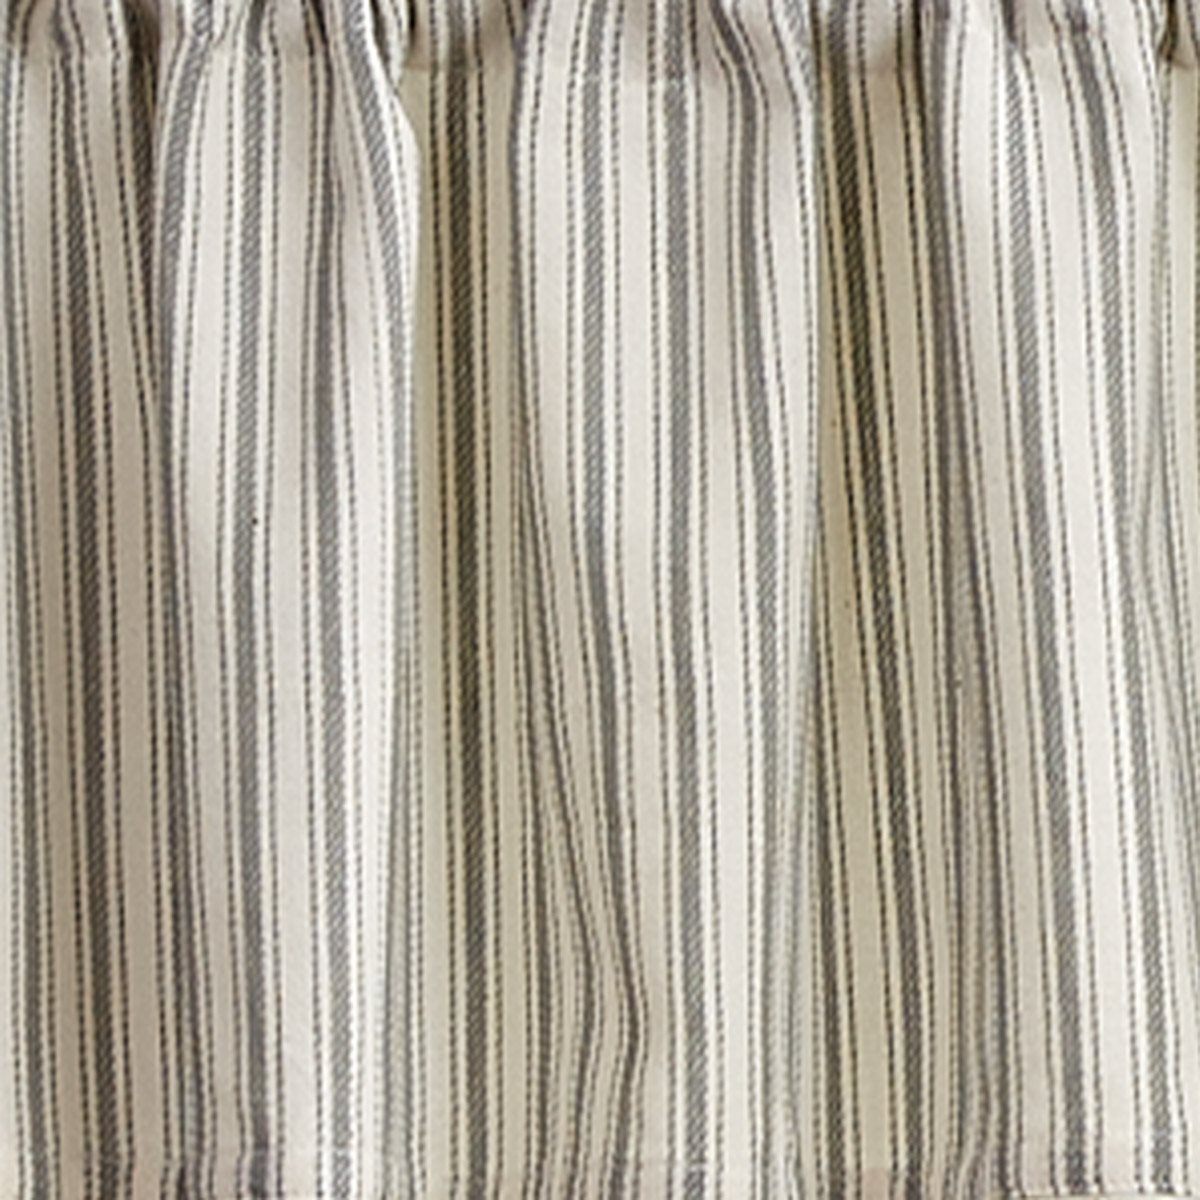 Ticking With Ball Fringe Valance 72X14 by Park Designs